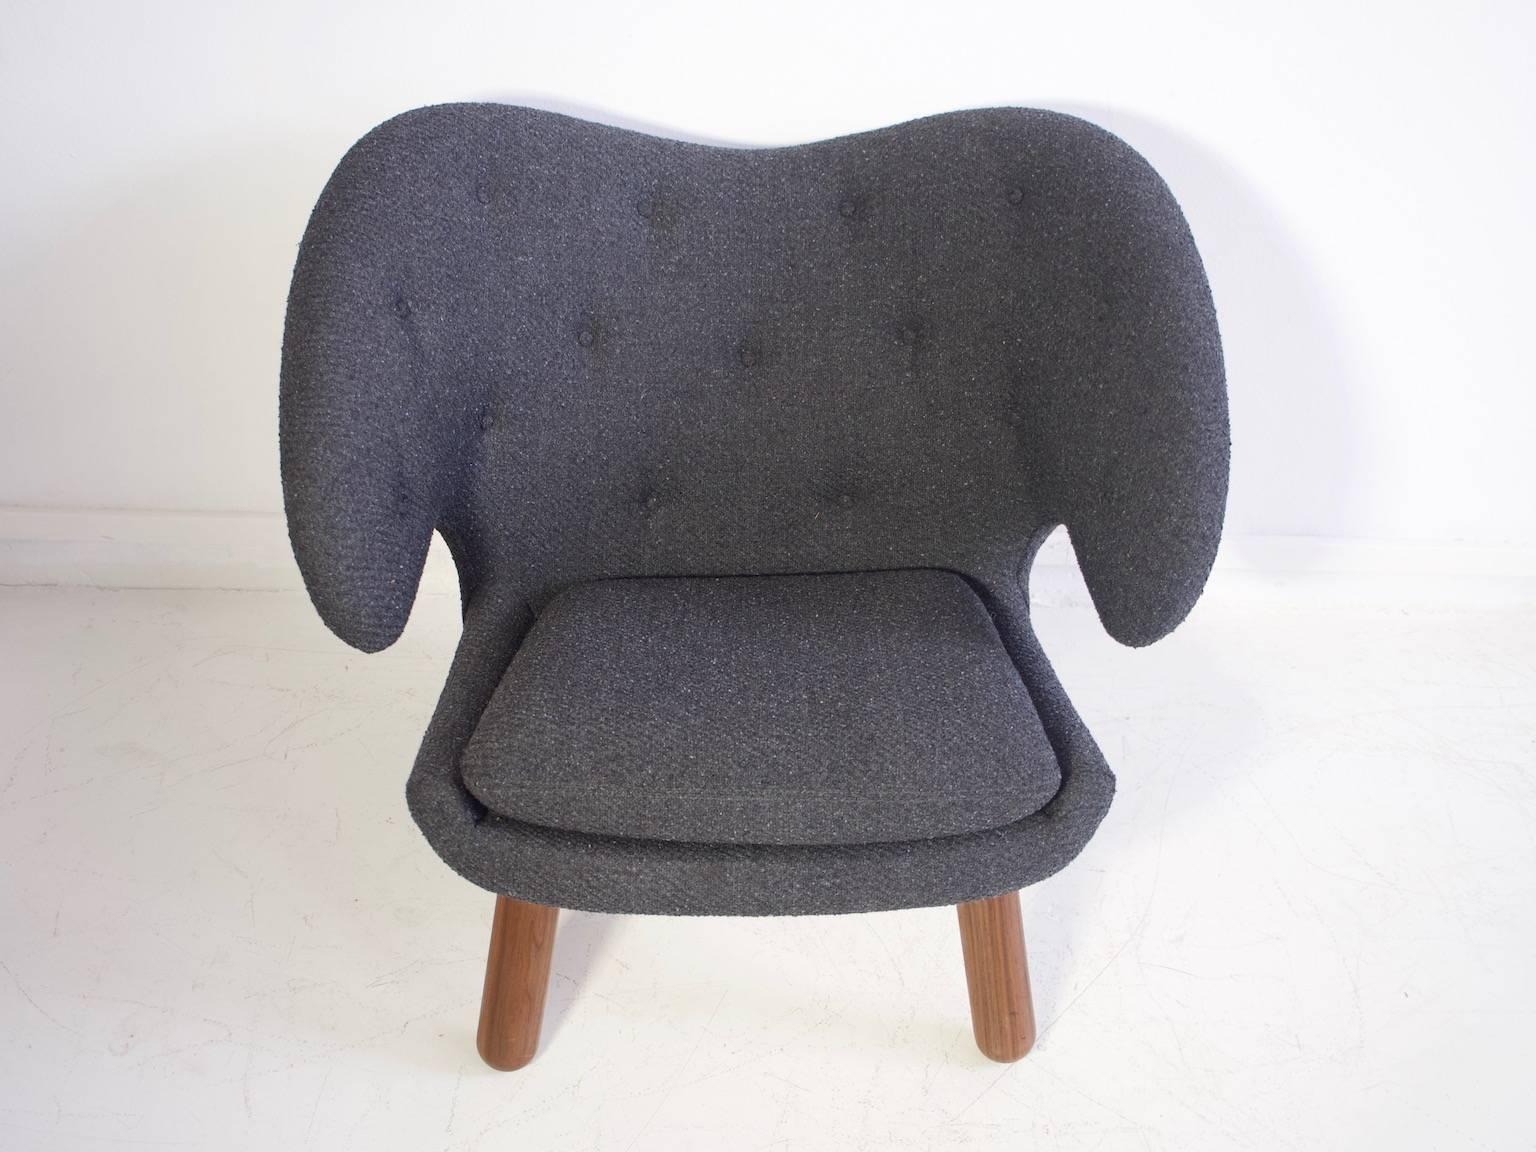 Finn Juhl Pelikan Lounge Chair with Grey Upholstery and Round Walnut Legs 1